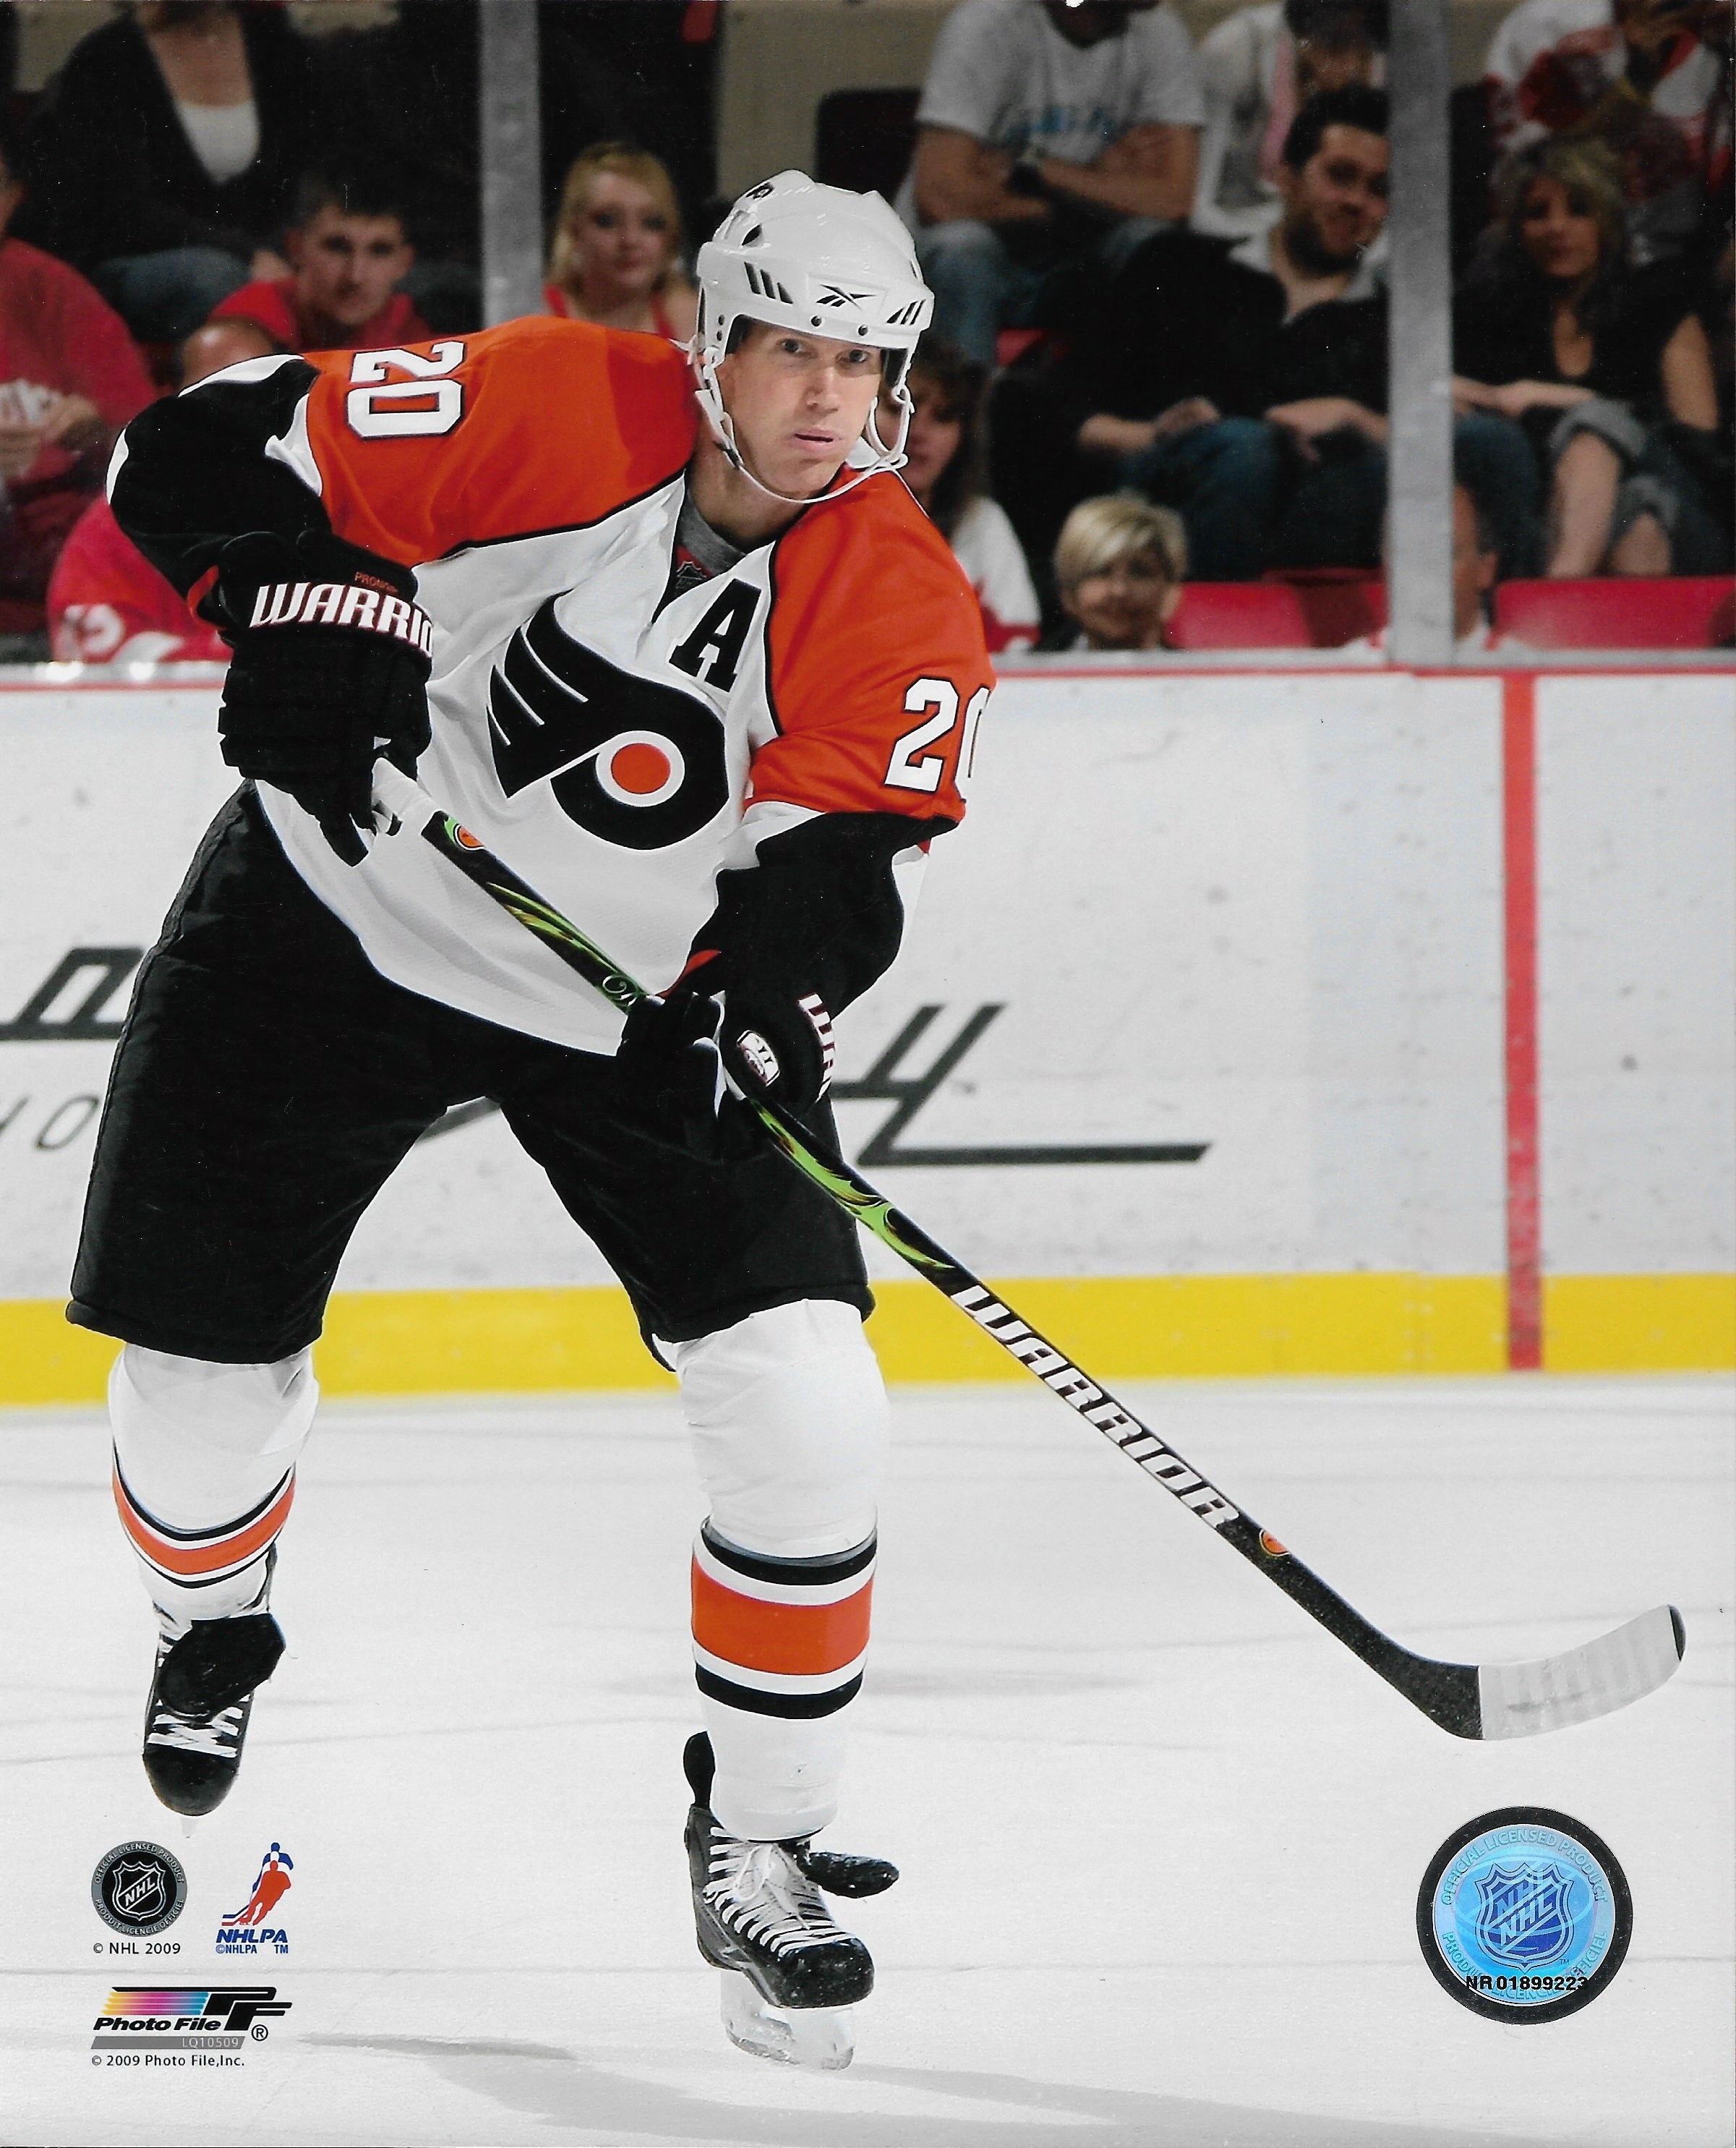 Charitybuzz: Collect a Signed Pair of Ice Skates from Chris Pronger of the  Philadelphia Flyers